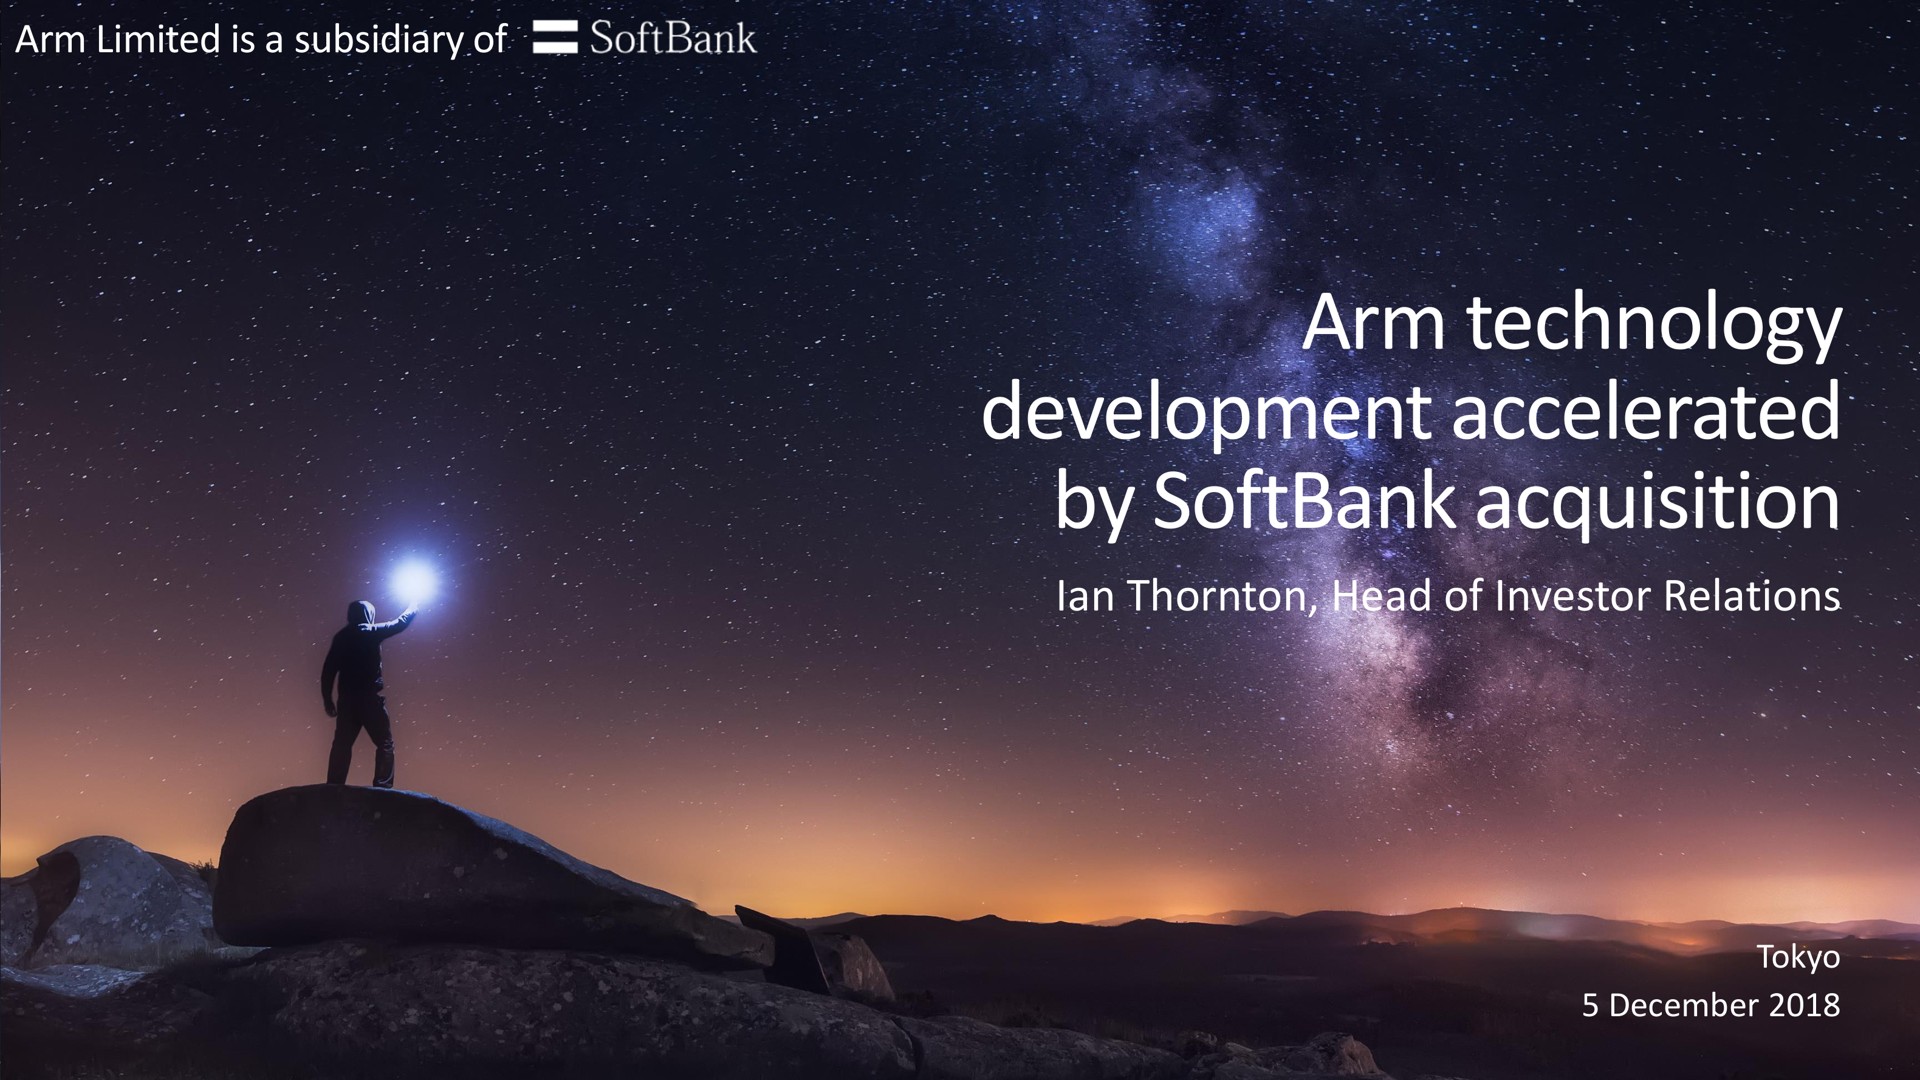 arm technology development accelerated by acquisition ponce eer leet nee | SoftBank